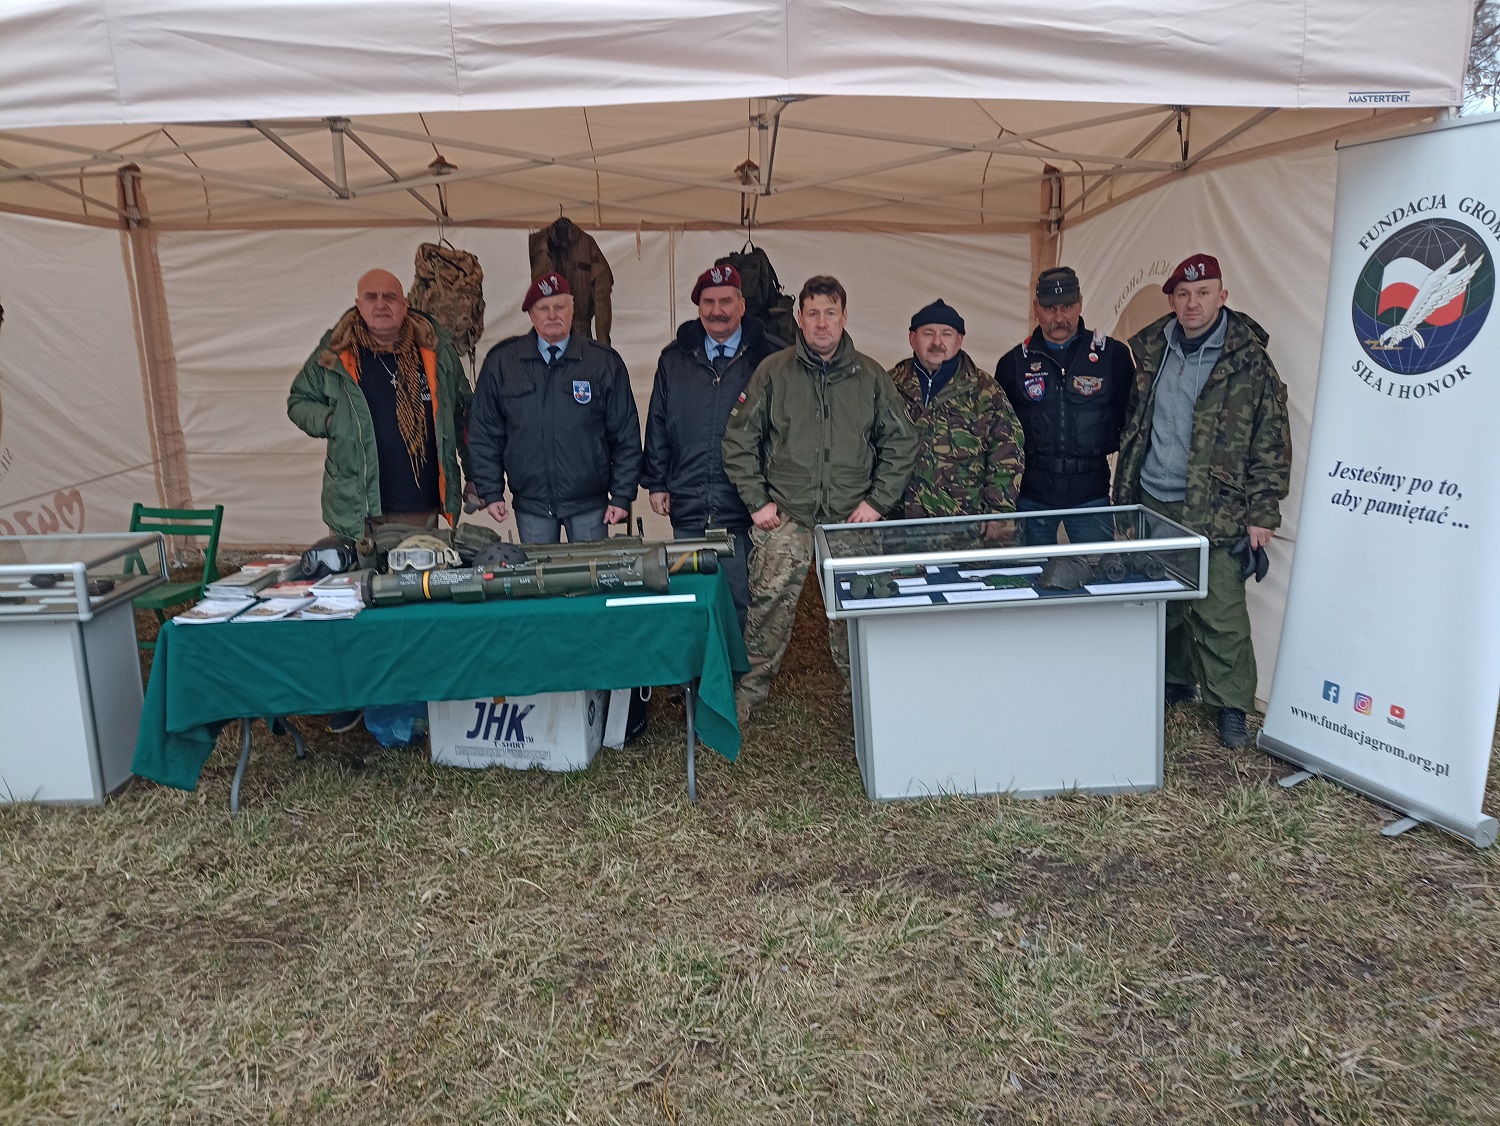 On March 5 this year in the village of Łosinno, in Wyszków district, GROM Foundation. Strength and Honor took part in the celebration of the 80th anniversary of the „Cichociemni” drop as part of the „Collar” air operation